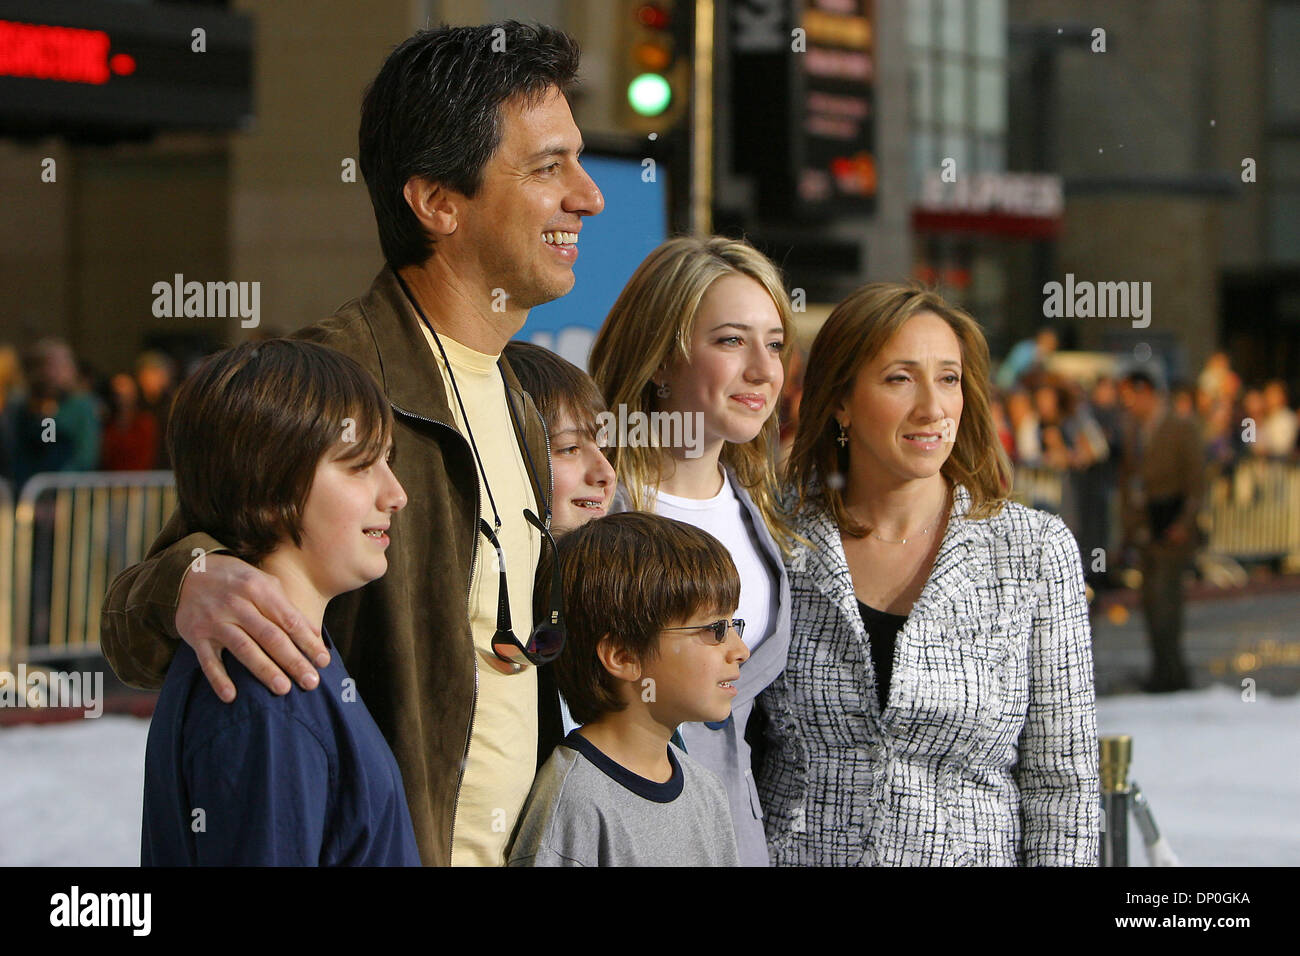 Mar 19, 2006; Hollywood, CA, USA; RAY ROMANO and family during arrivals at the Hollywood premiere of 'Ice Age: The Meltdown' held at the Mann Grauman Chinese Theater. Mandatory Credit: Photo by Jerome Ware/ZUMA Press. (©) Copyright 2006 by Jerome Ware Stock Photo